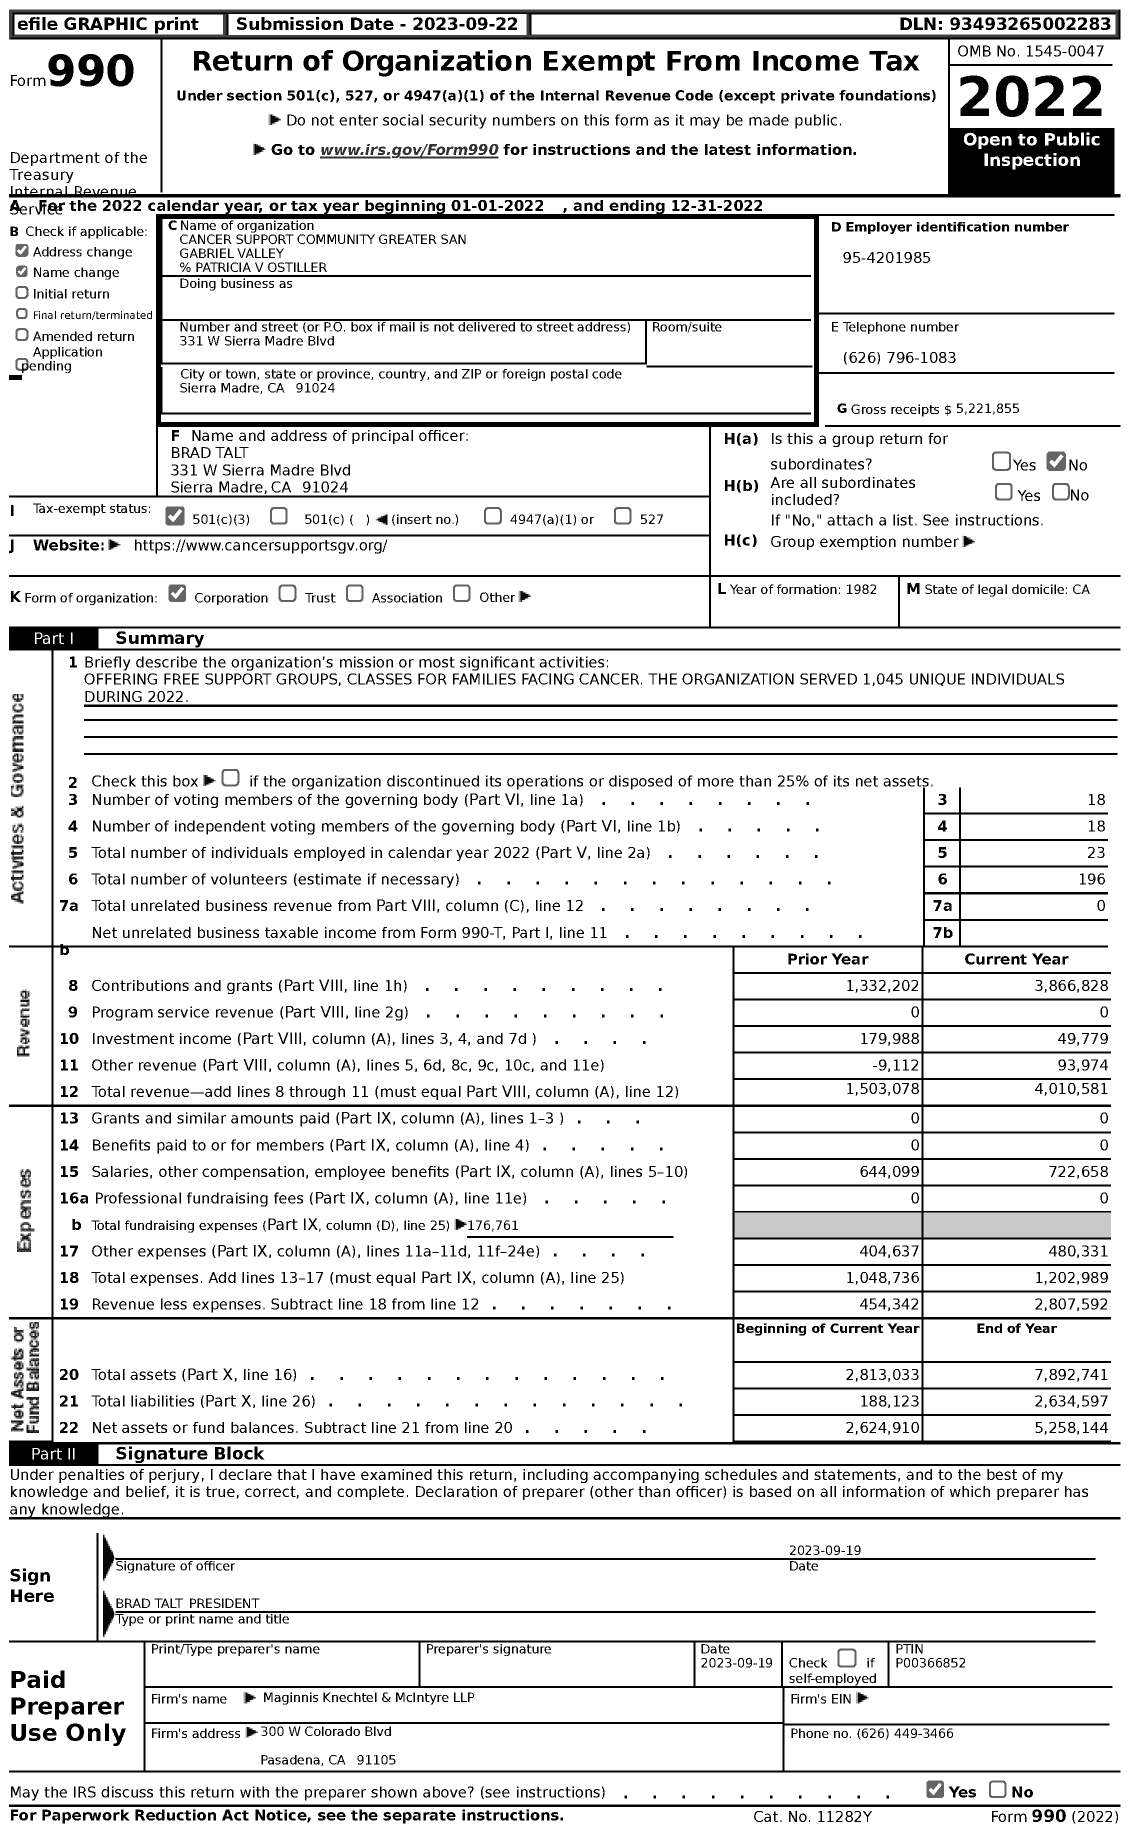 Image of first page of 2022 Form 990 for Cancer Support Community Greater San Gabriel Valley